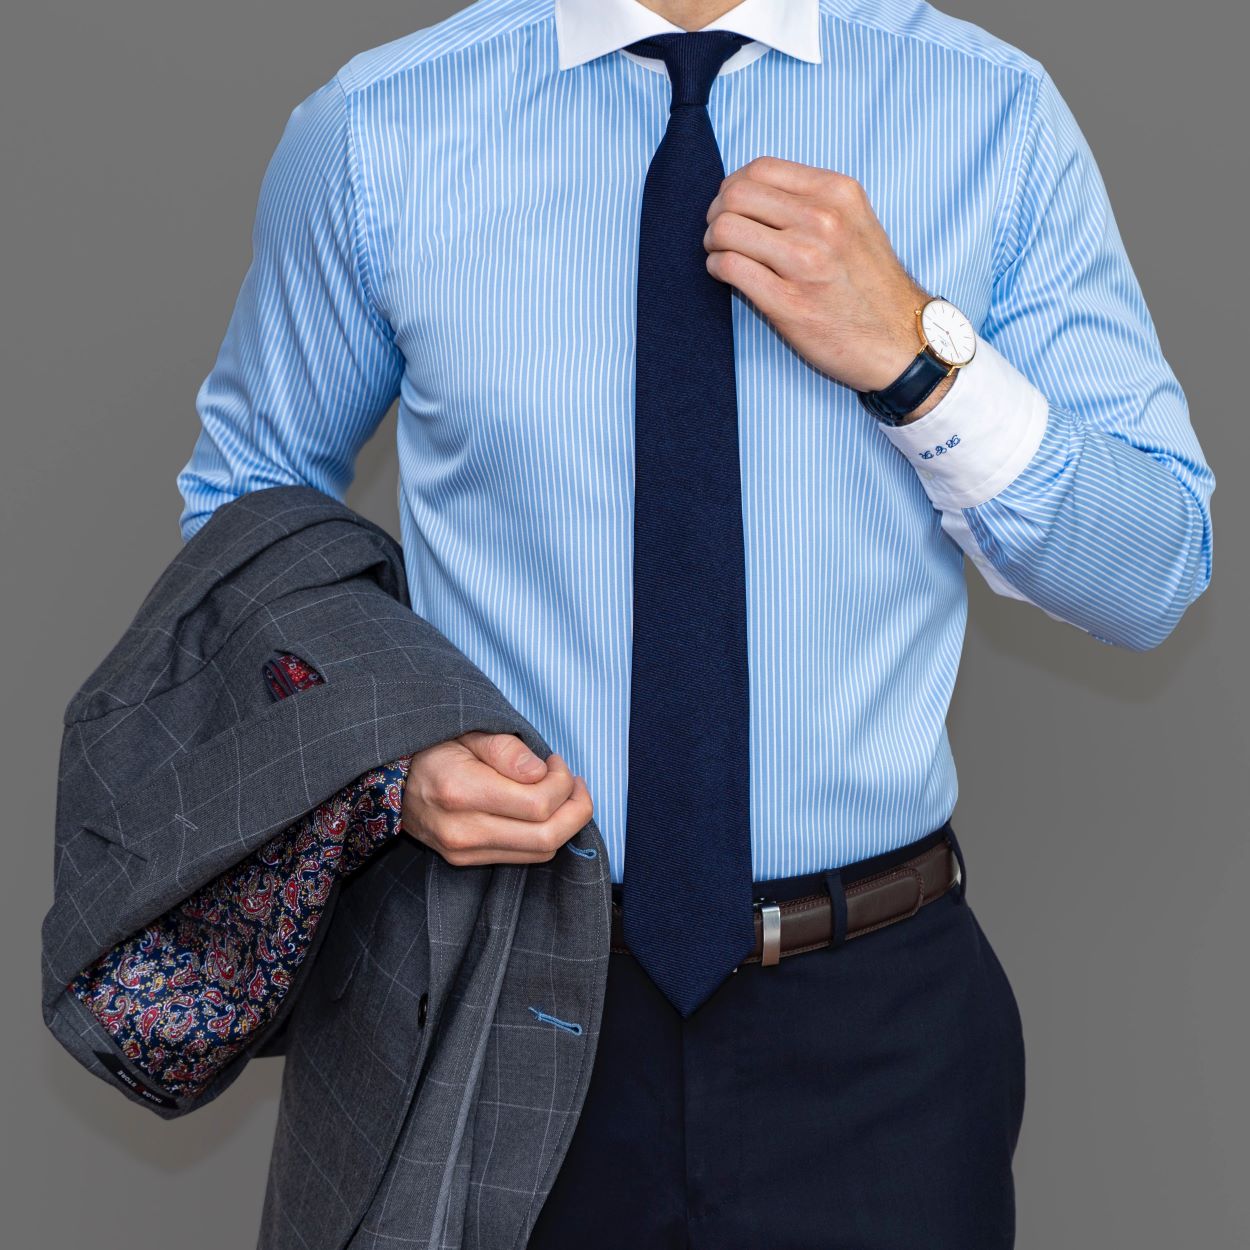 Dress Shirts can be Slim-Fit or Straight-Fit